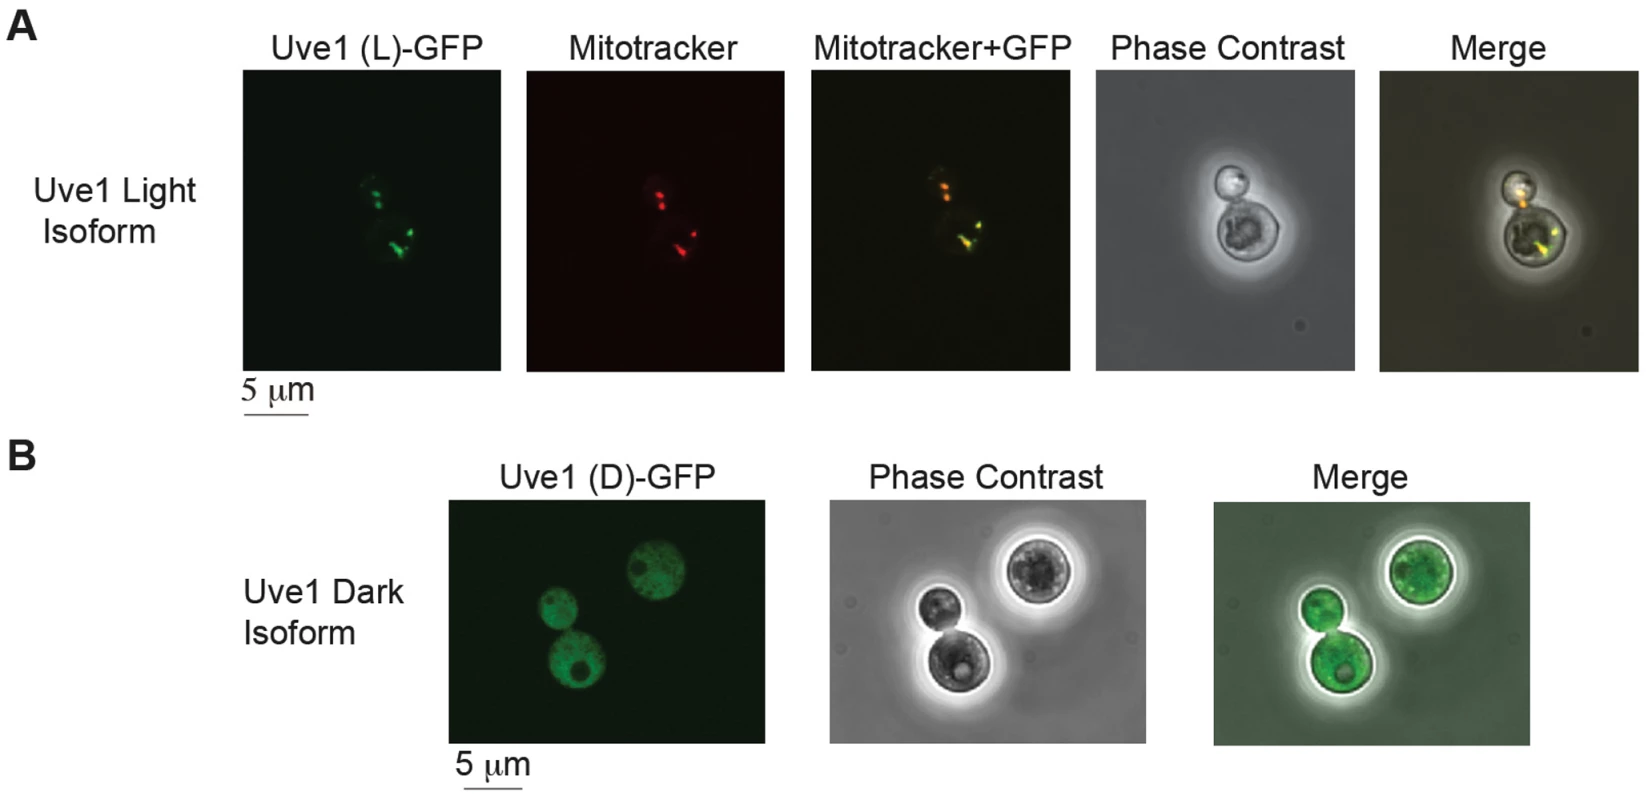 Subcellular localization of Uve1 (L)-GFP and Uve1 (D)-GFP from &lt;i&gt;C. neoformans&lt;/i&gt; var. &lt;i&gt;neoformans&lt;/i&gt; in the vegetative yeast cells of &lt;i&gt;C. neoformans&lt;/i&gt; var. &lt;i&gt;grubii&lt;/i&gt; (A) Uve1 (L)-GFP localization and (B) Uve1 (D)-GFP localization.